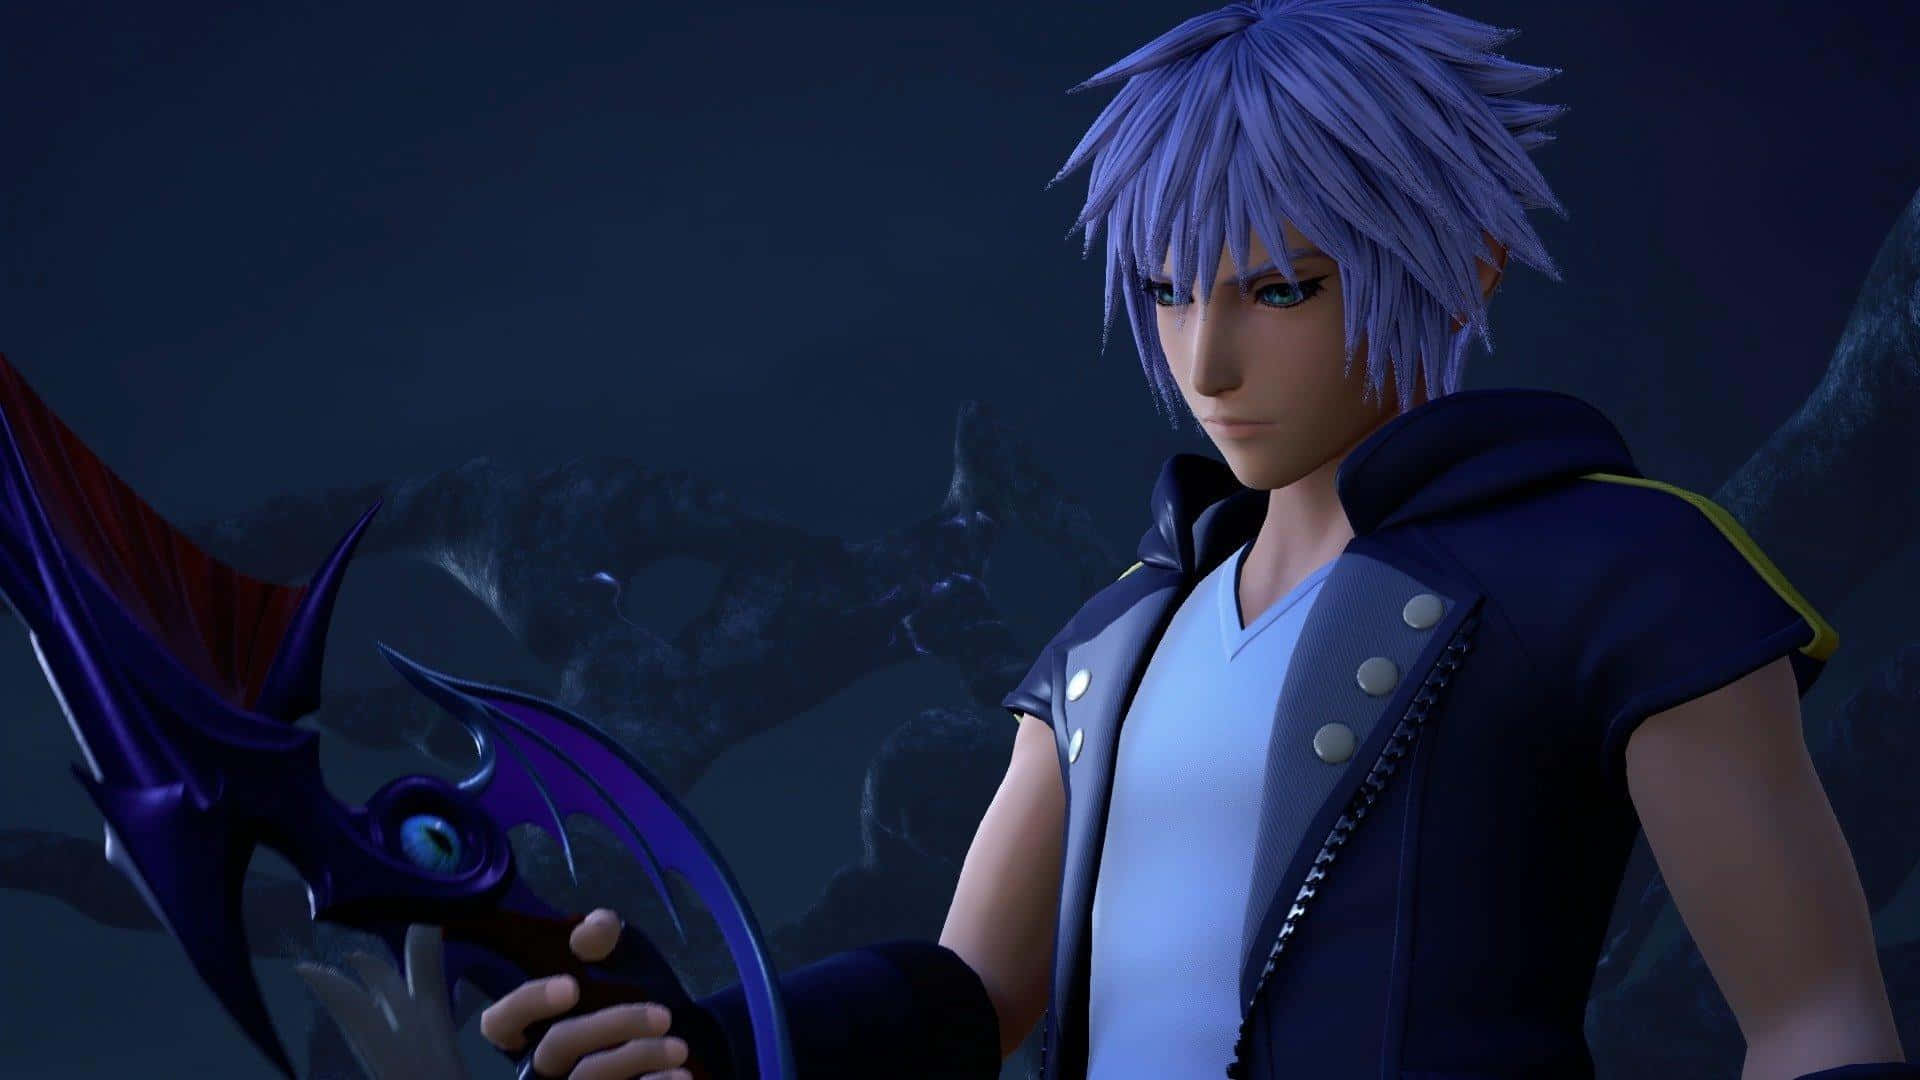 Riku standing strong in the realm of Kingdom Hearts Wallpaper